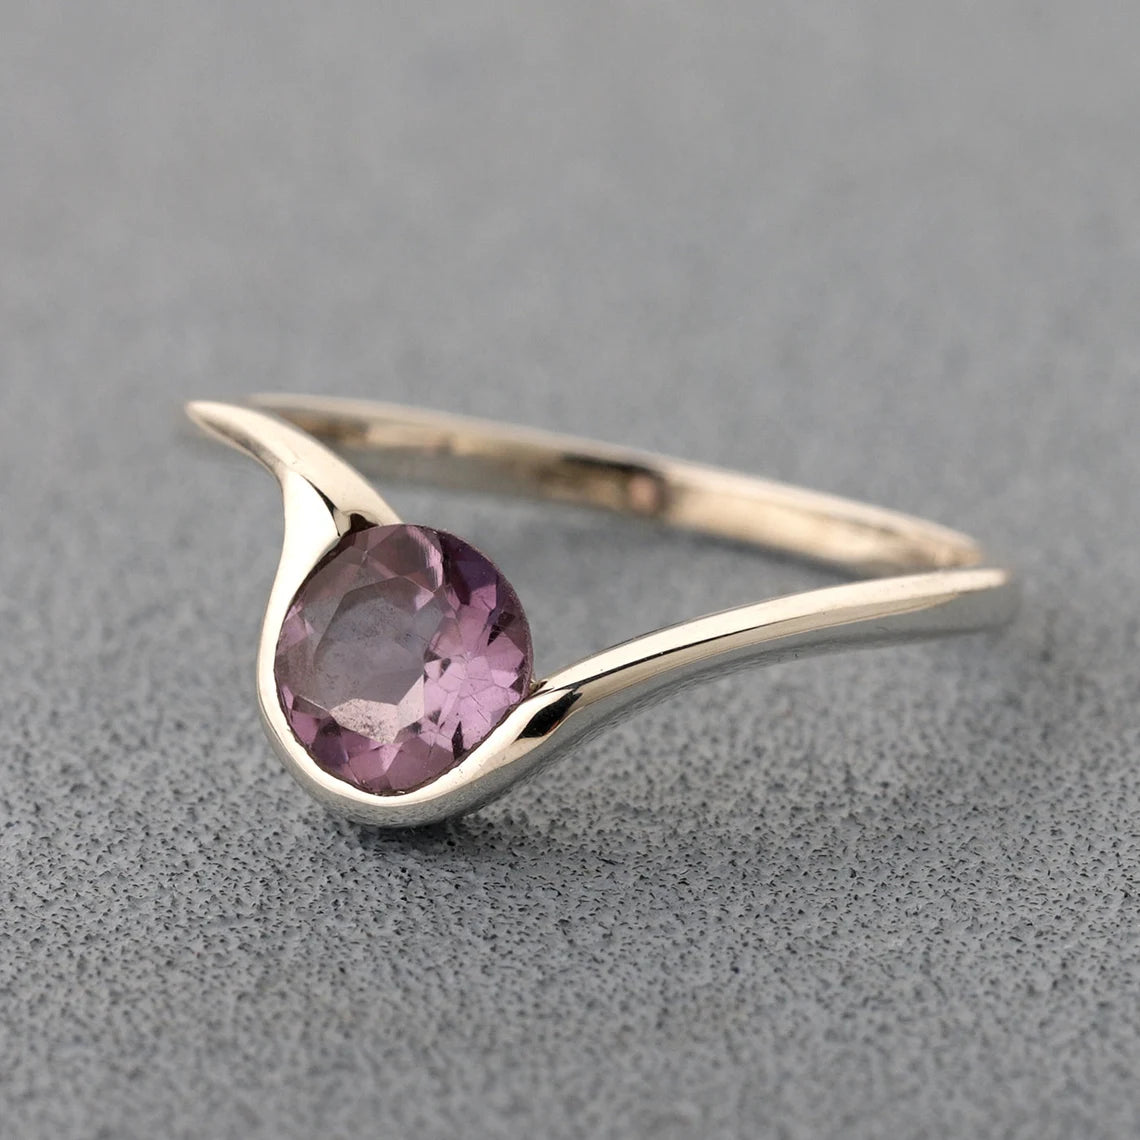 Engagement Ring Natural Amethyst Ring February Birthstone Round Cut Gemstone Sterling Silver Ring Bezel Setting